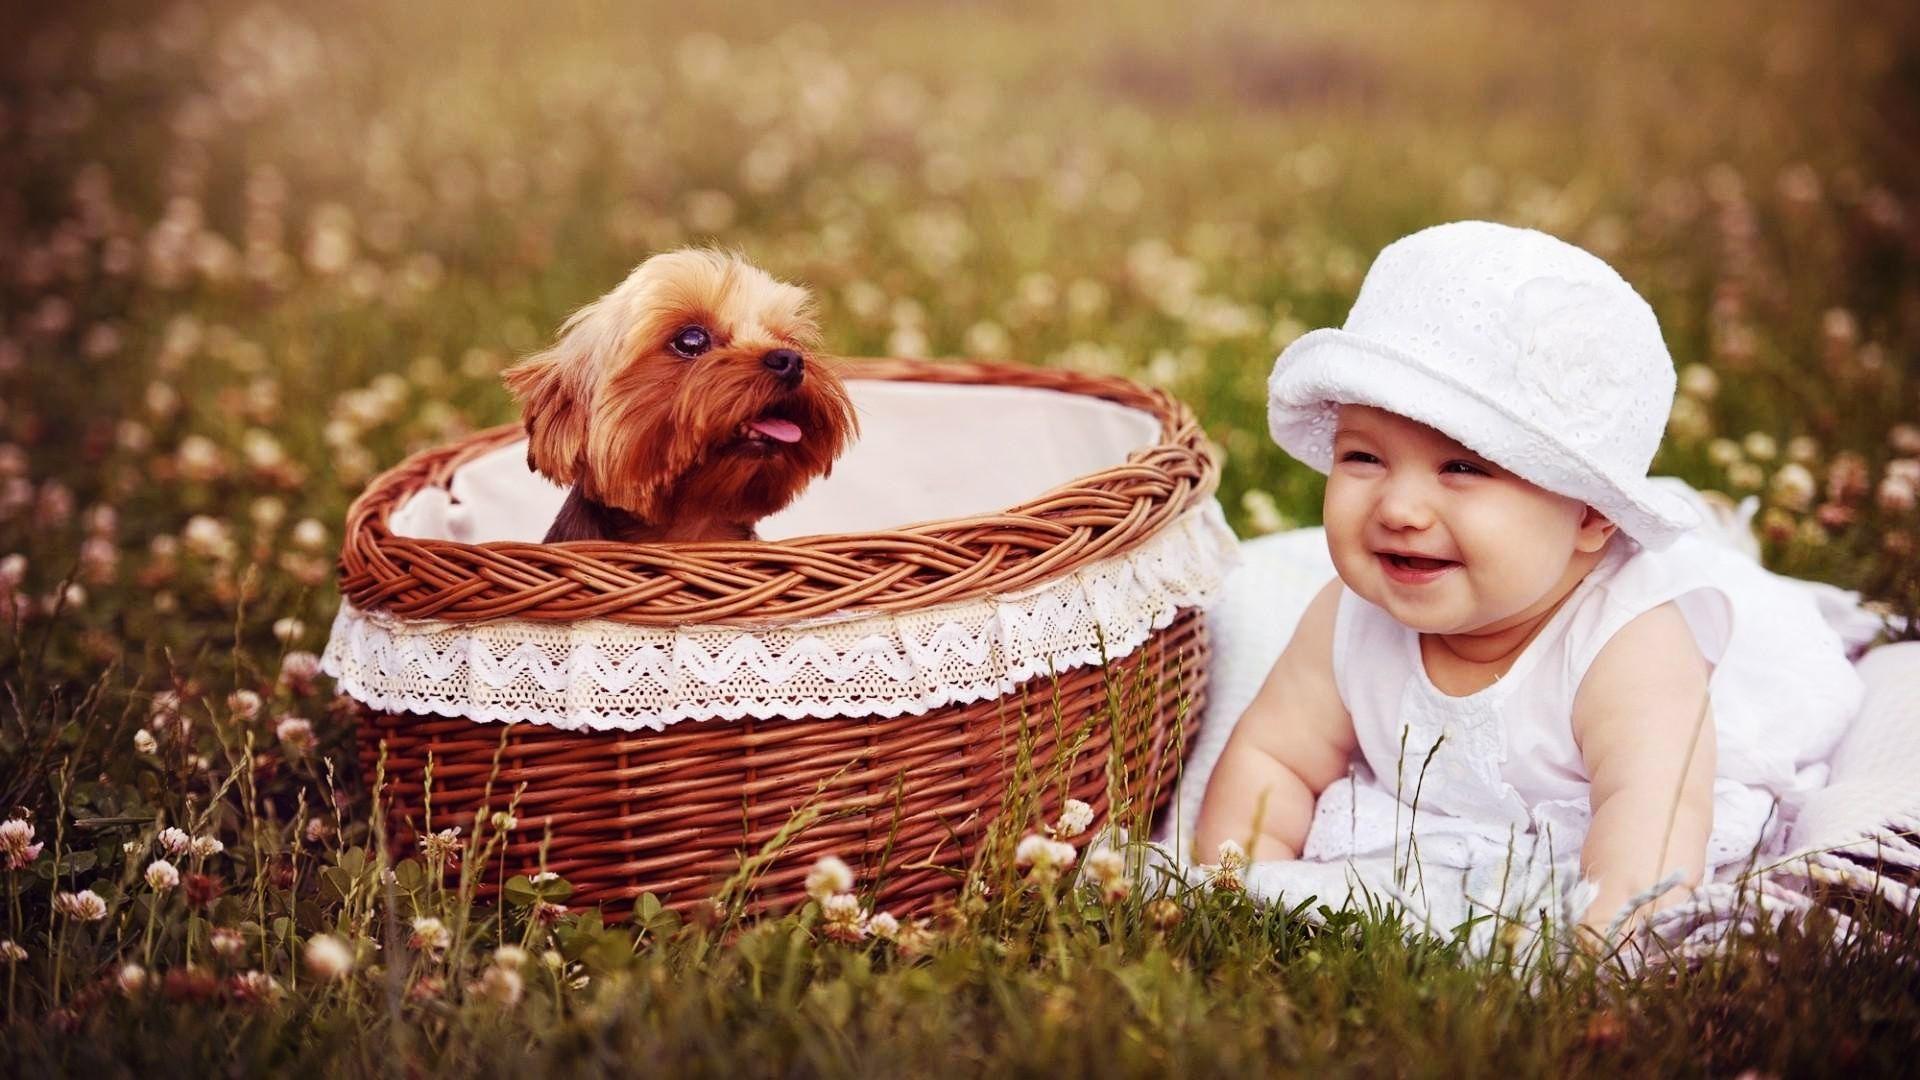 Cute Babies HD Image Background High Quality For Laptop Cutest